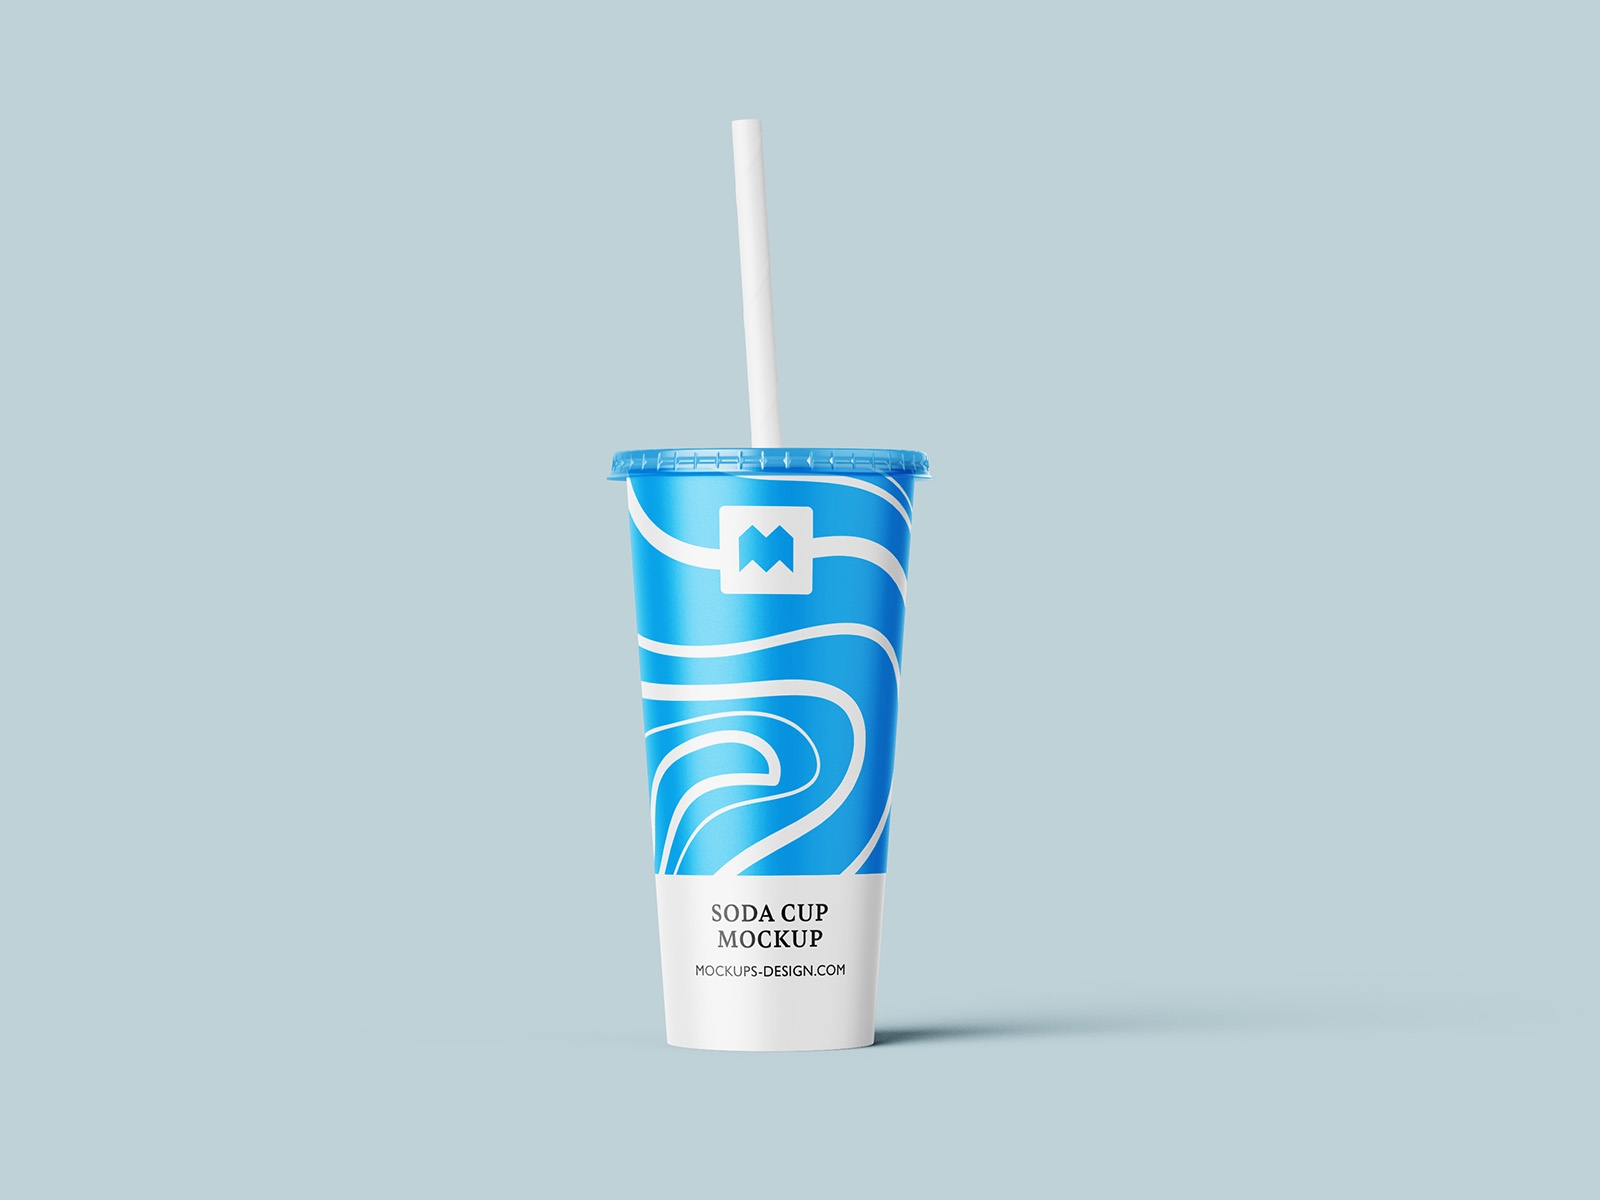 https://resourceboy.com/wp-content/uploads/2022/09/3-mockups-of-soda-drink-cup-with-straw-1.jpg